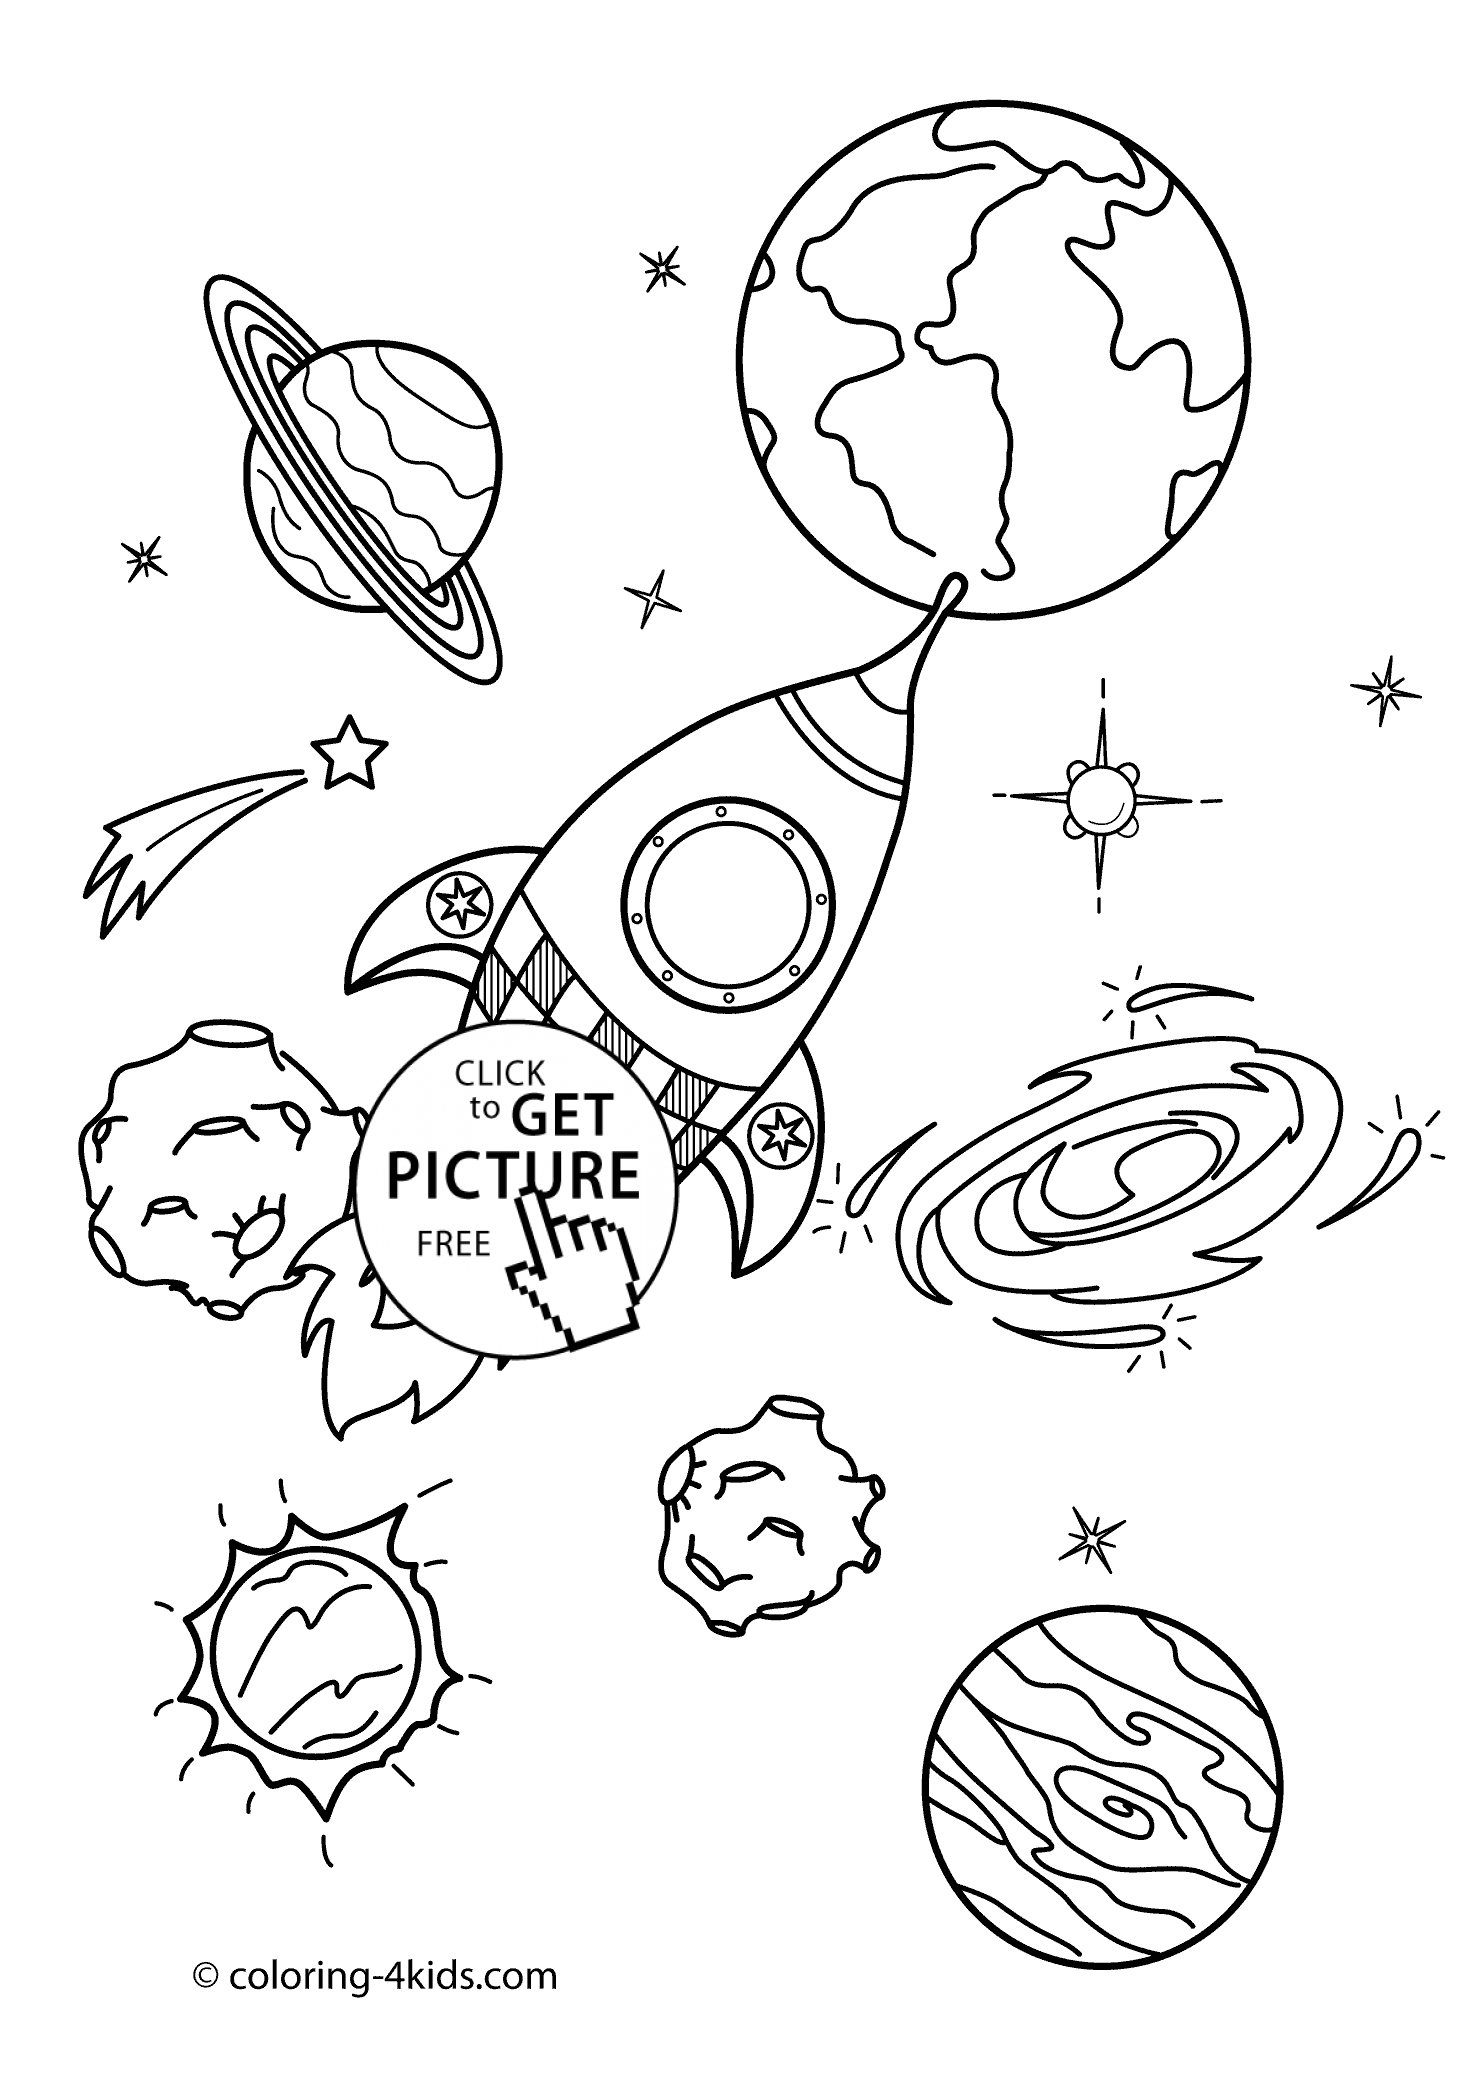 Space coloring pages for kids with rocket, printable free |  coloing-4kids.com